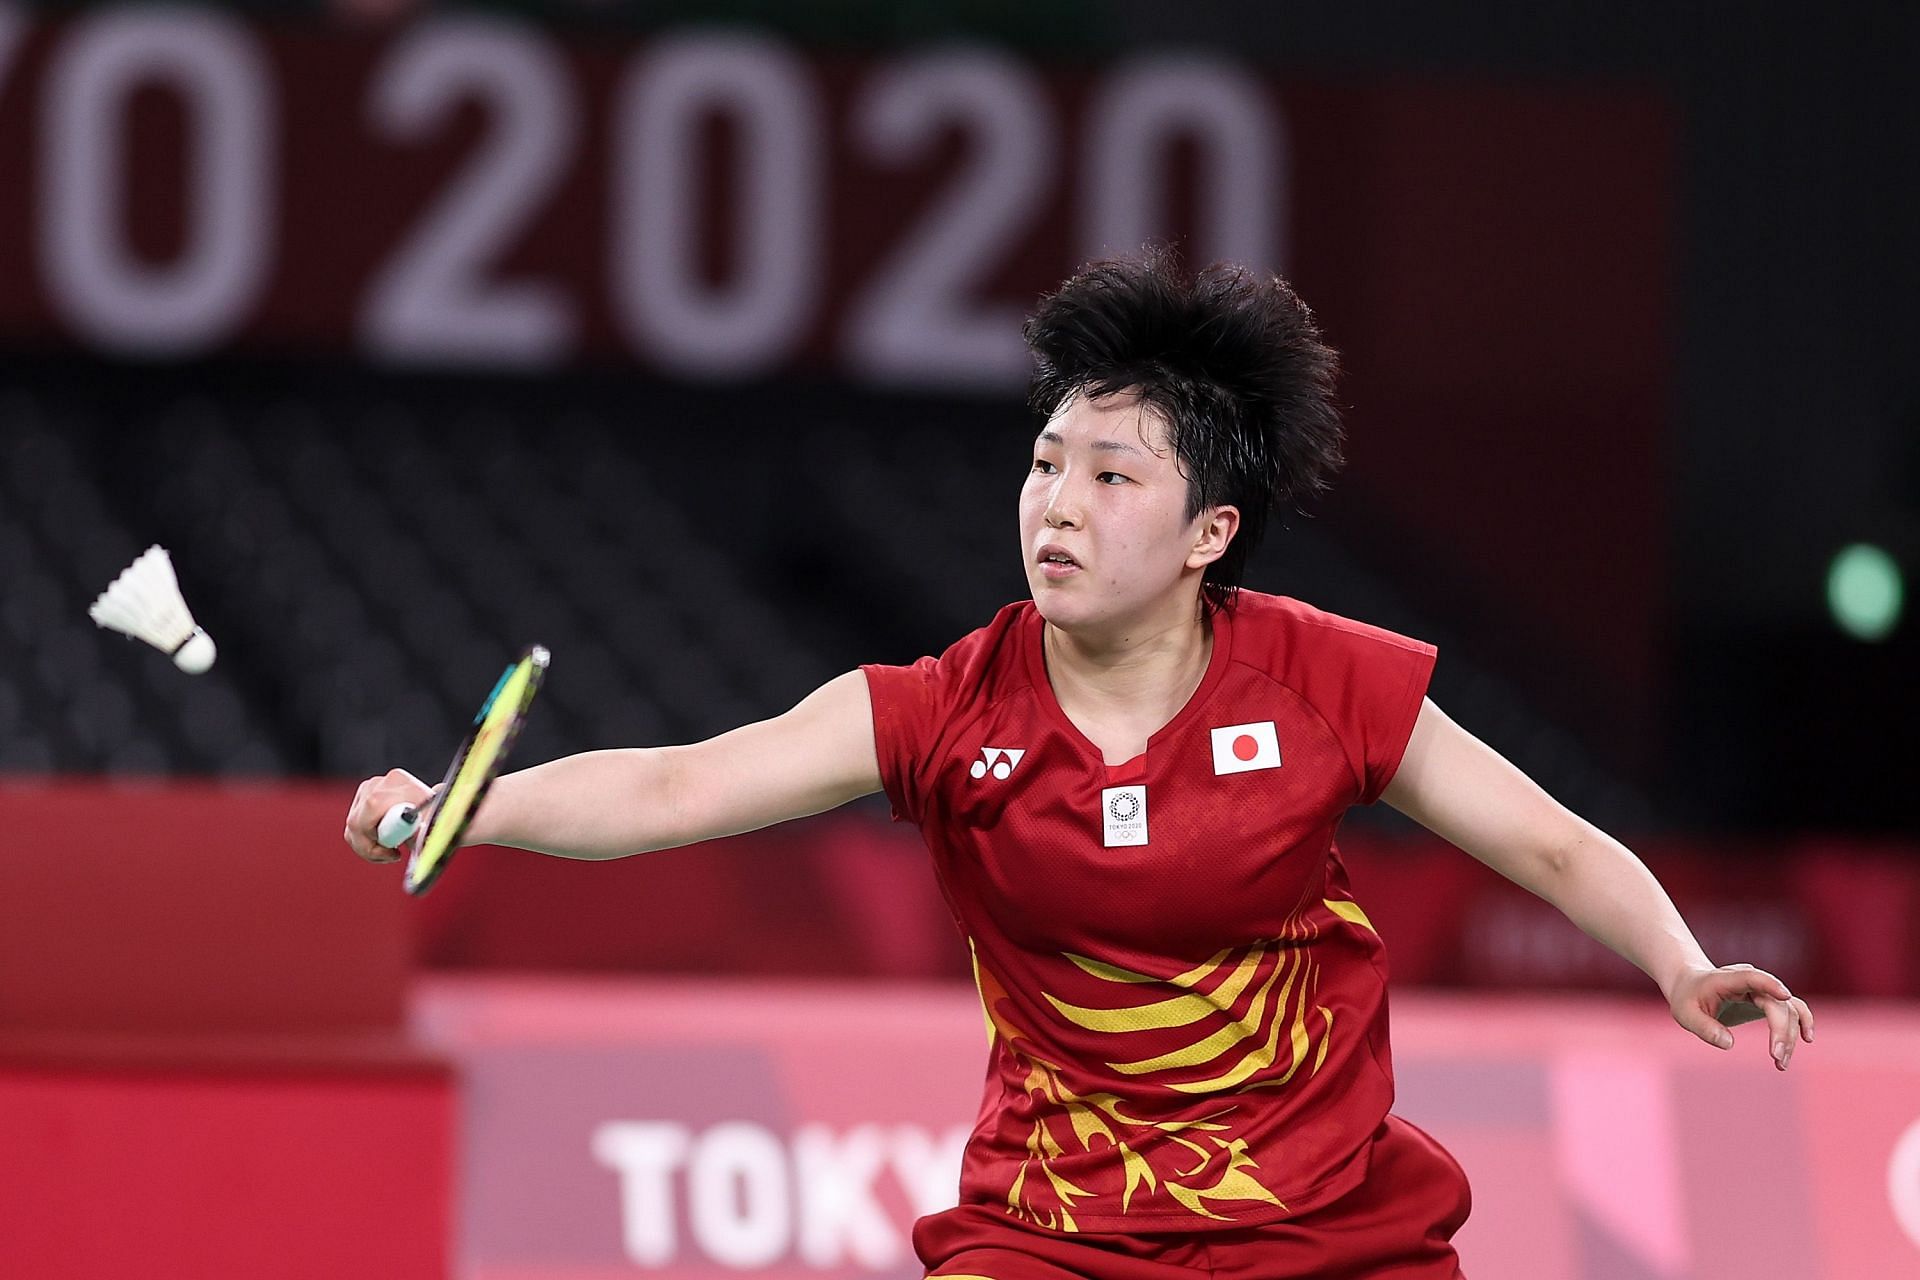 Akane Yamaguchi in action at the Tokyo Olympics.